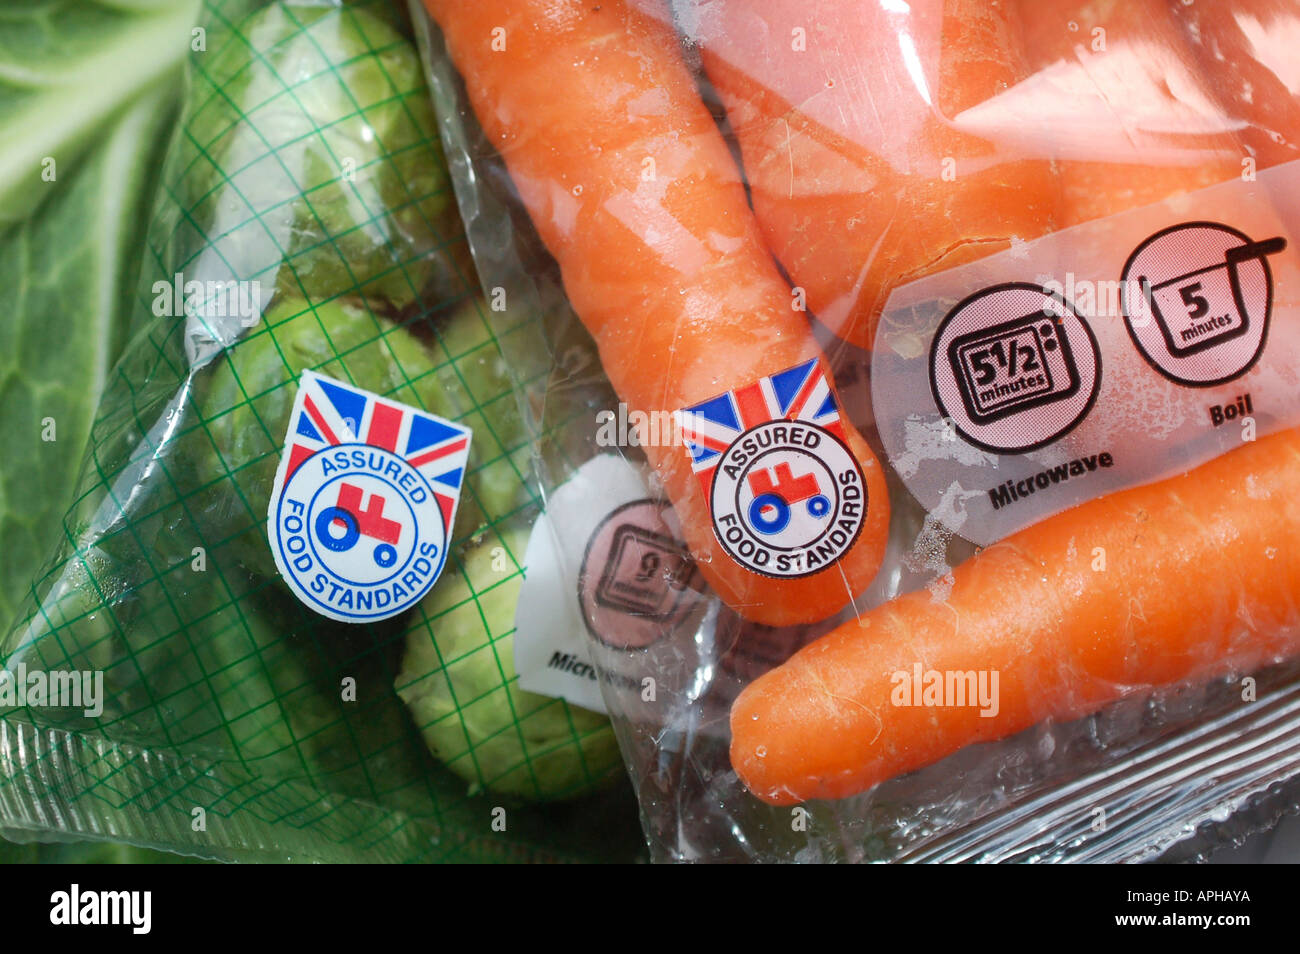 Red tractor label on British Assured Food Standards vegetables in the UK. Stock Photo